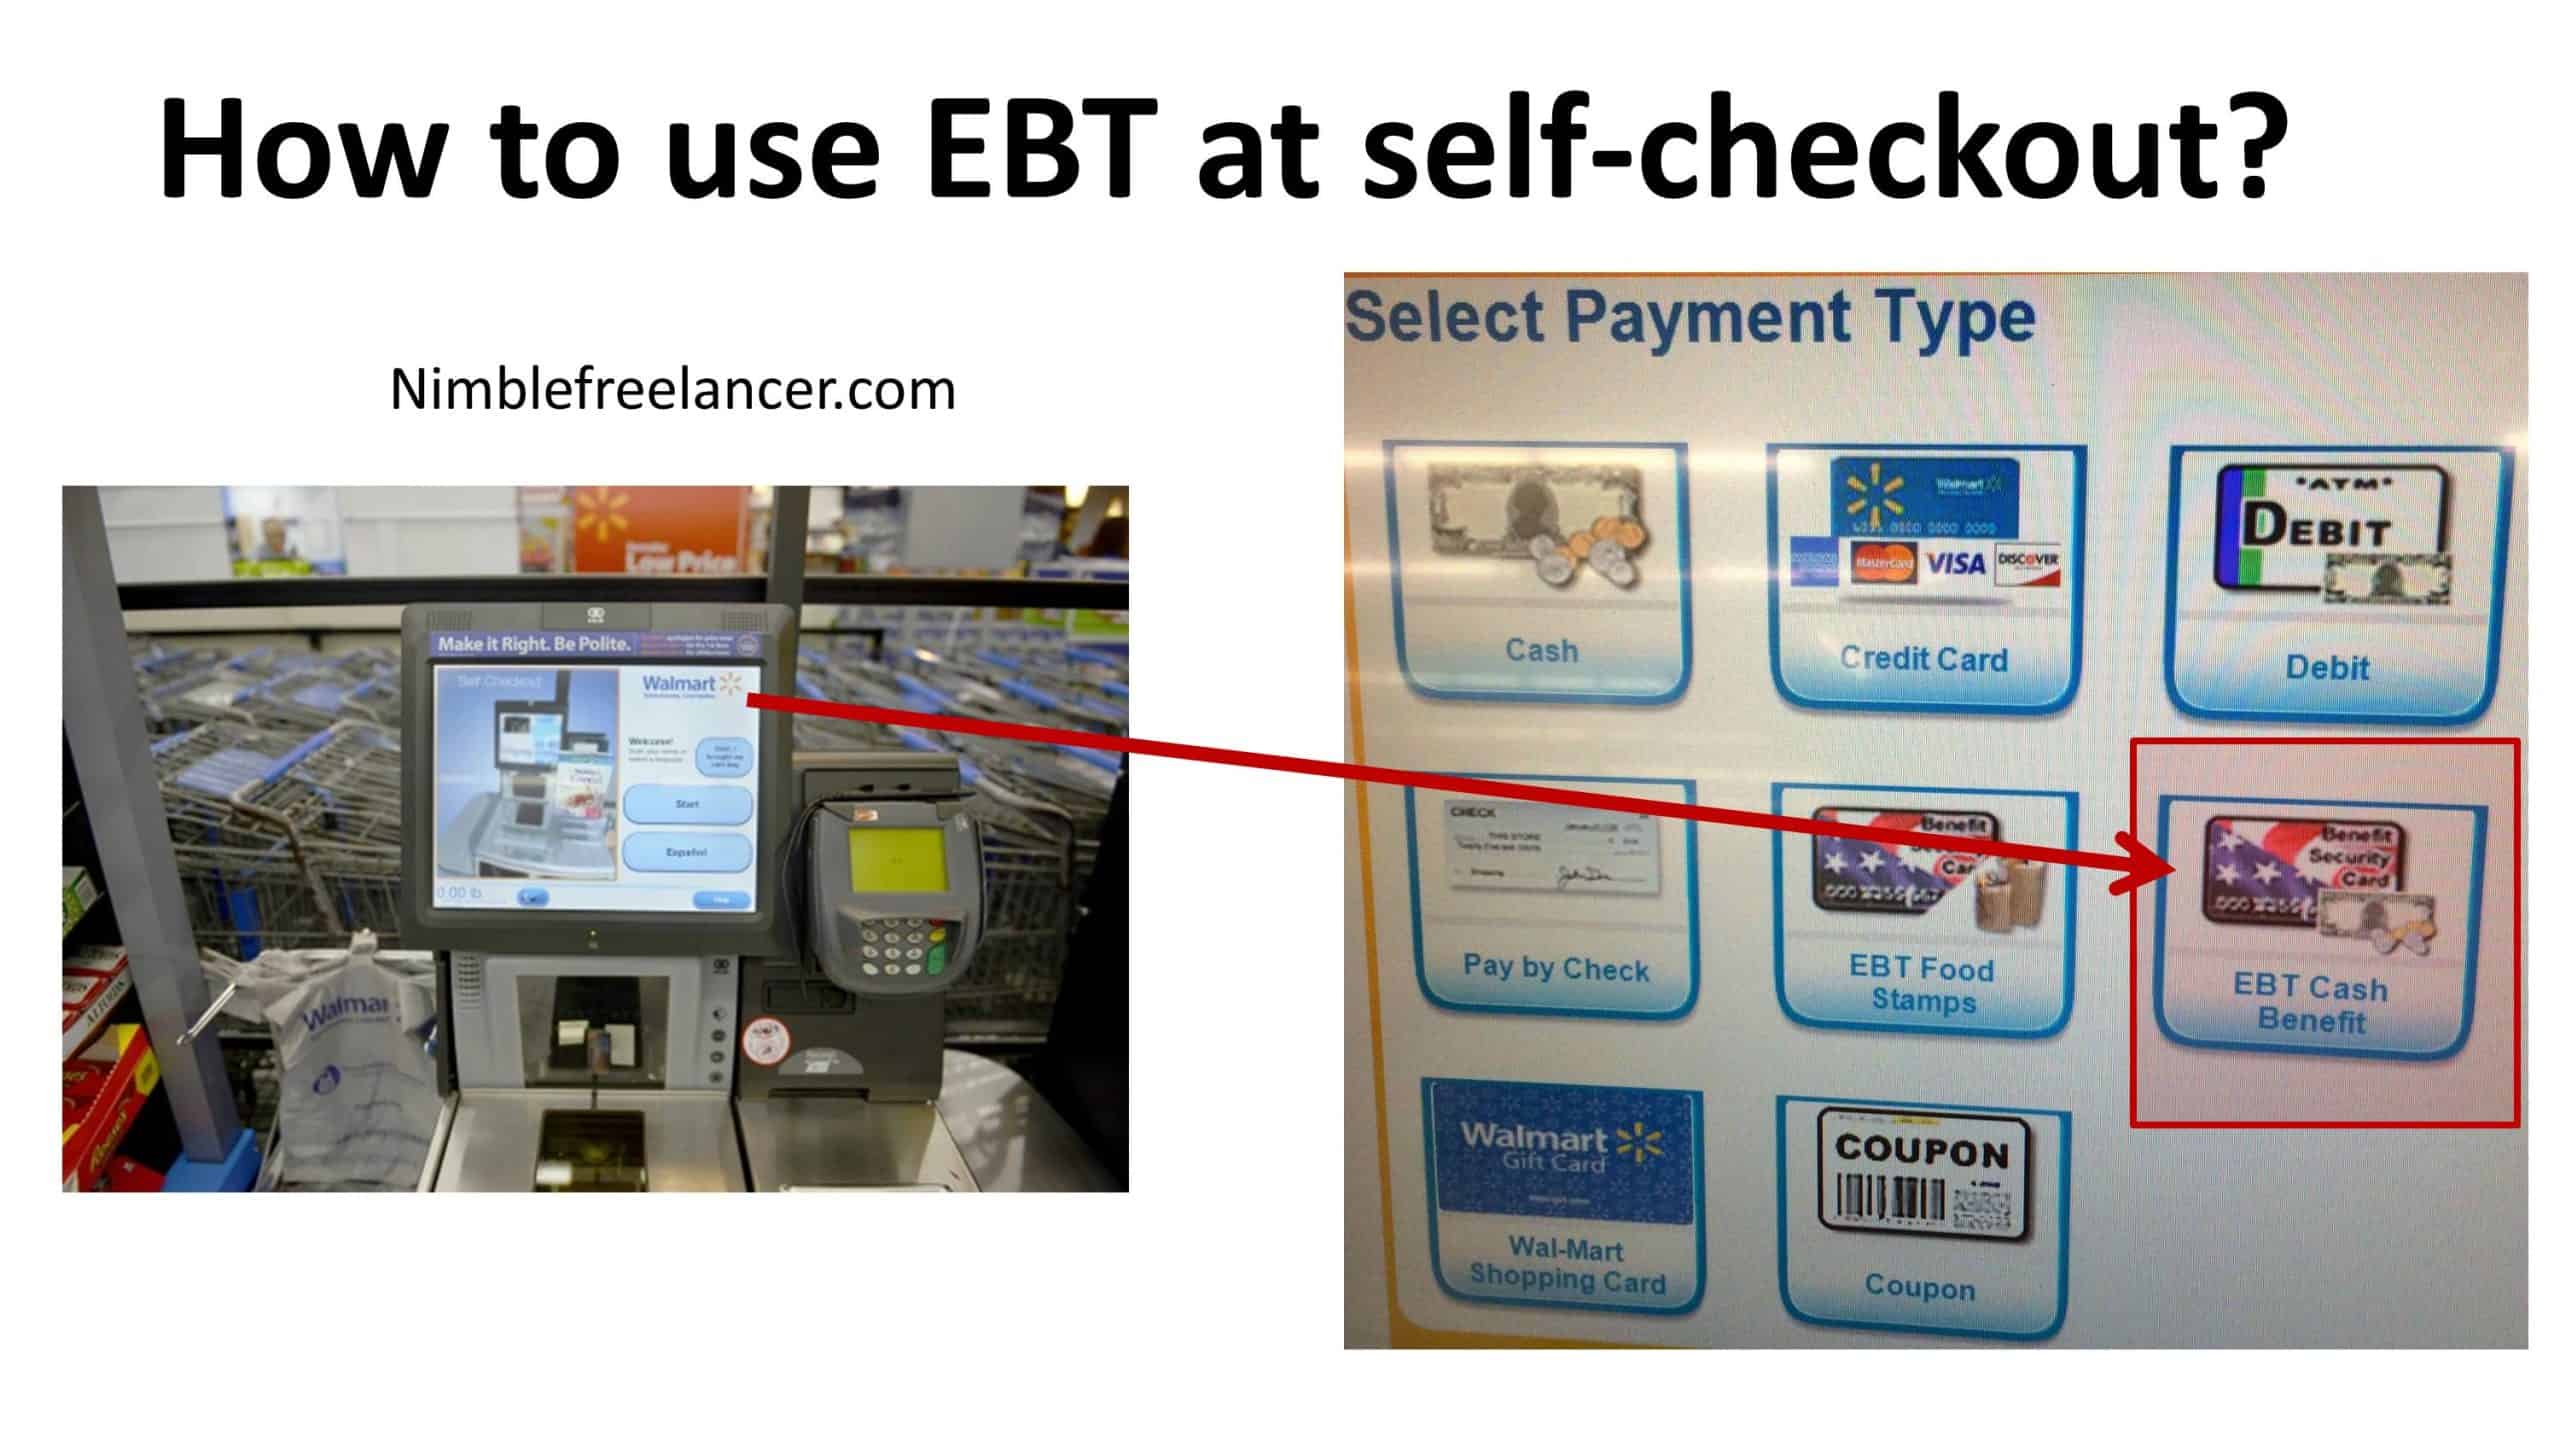 How to use EBT at self-checkout